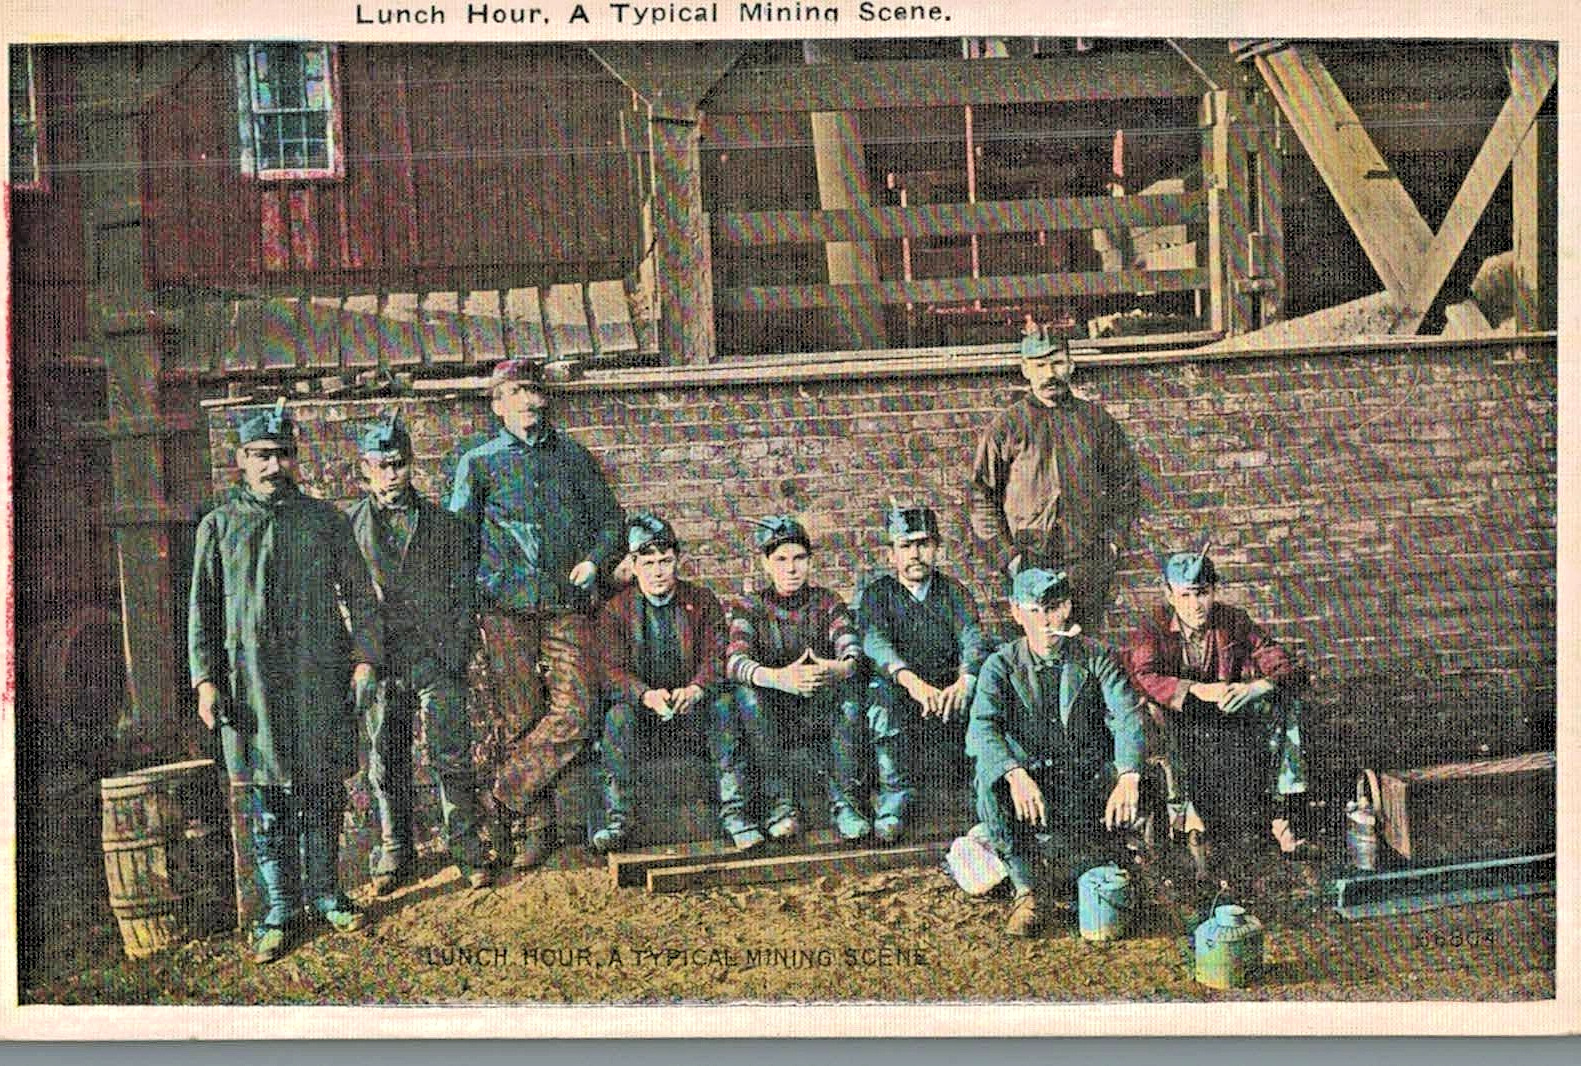 VIntage Postcard-Luncvh Hour, A Typical Mining Scene